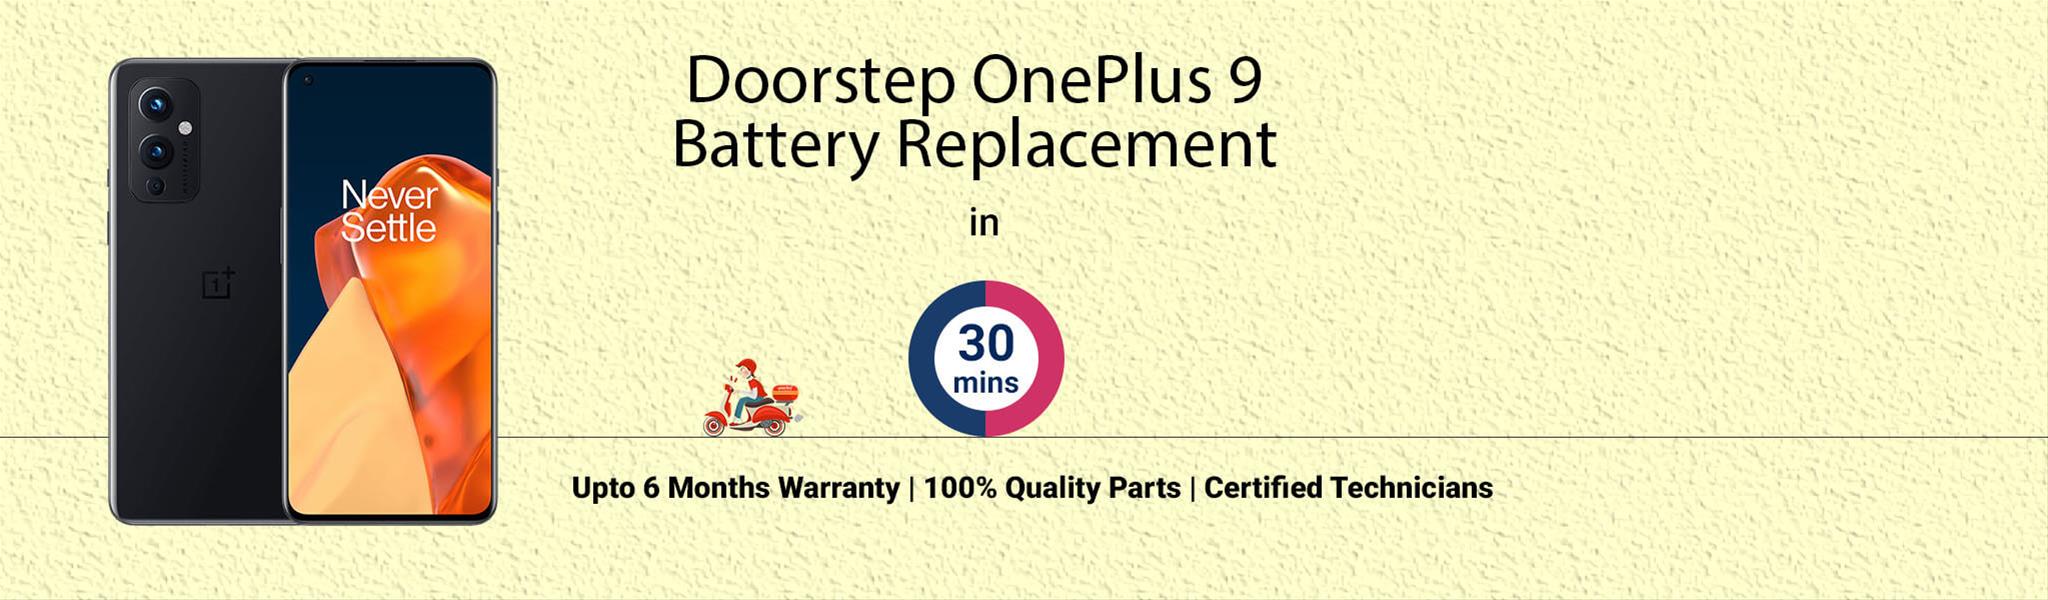 oneplus-9-battery-replacement.jpg